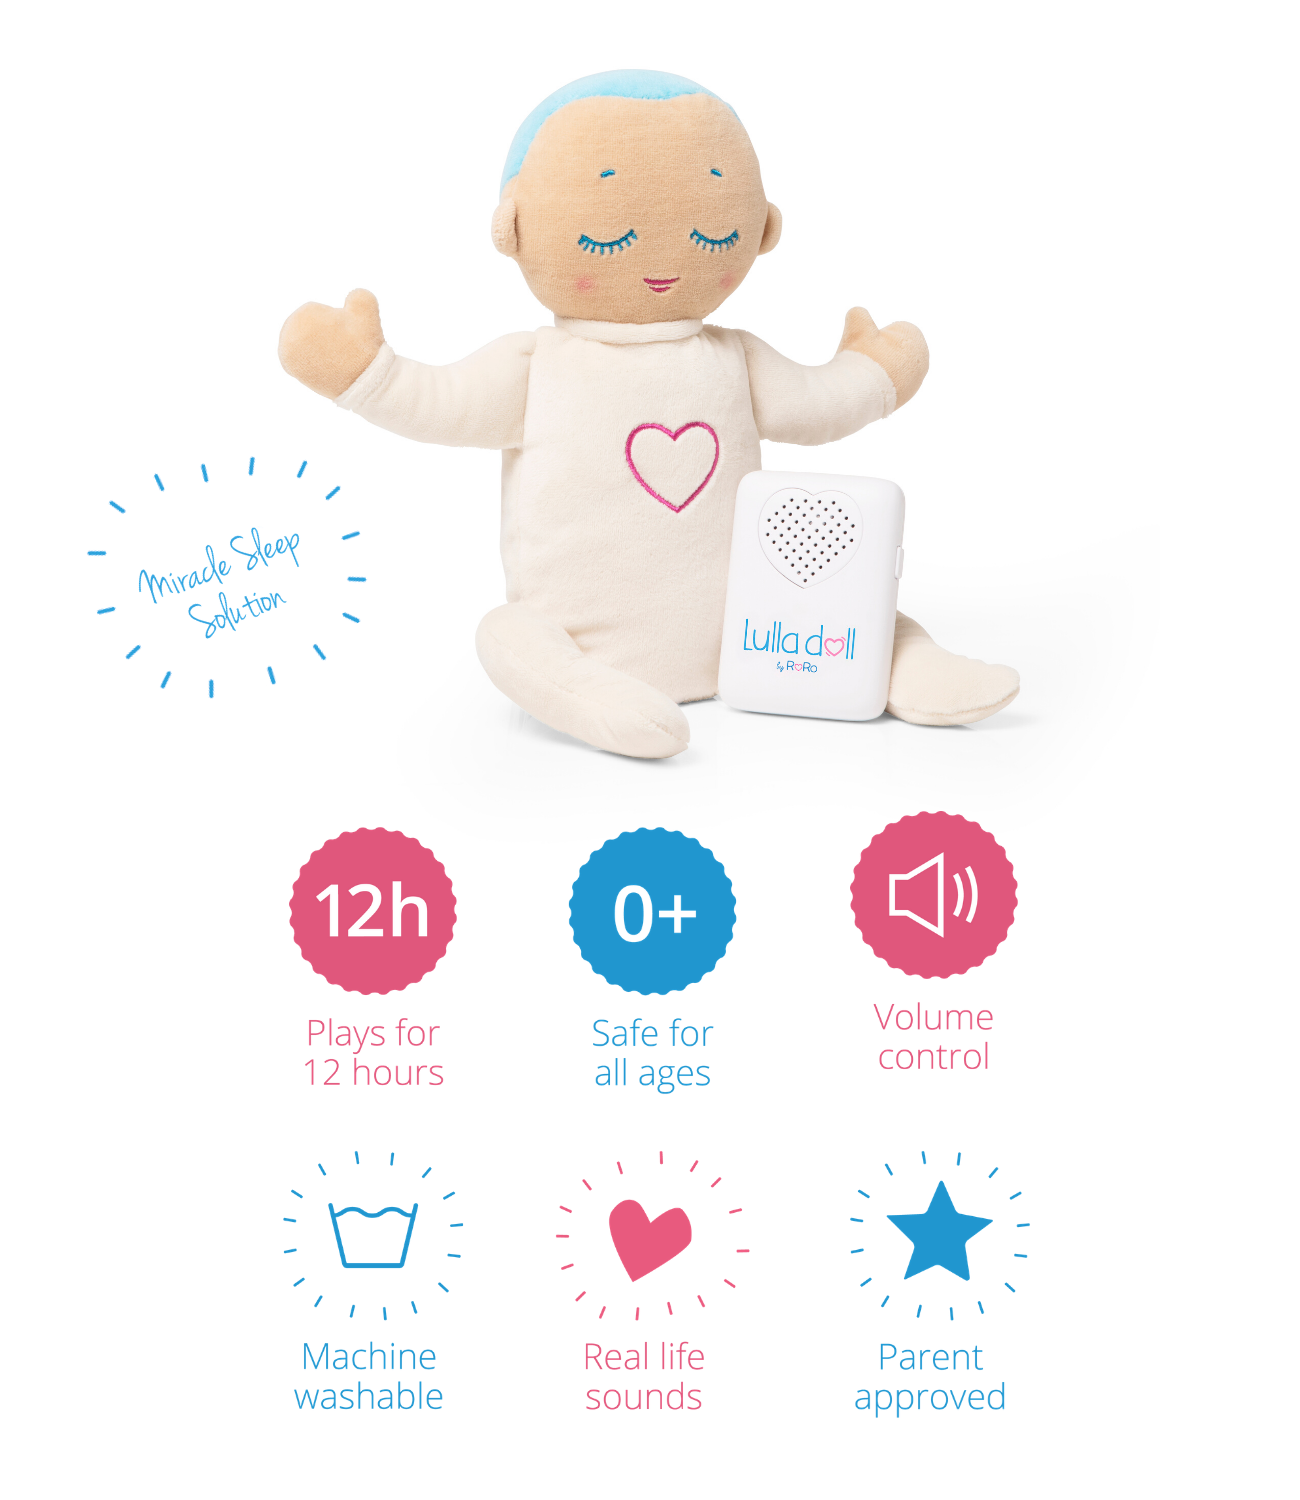 What is the best baby sleep aid